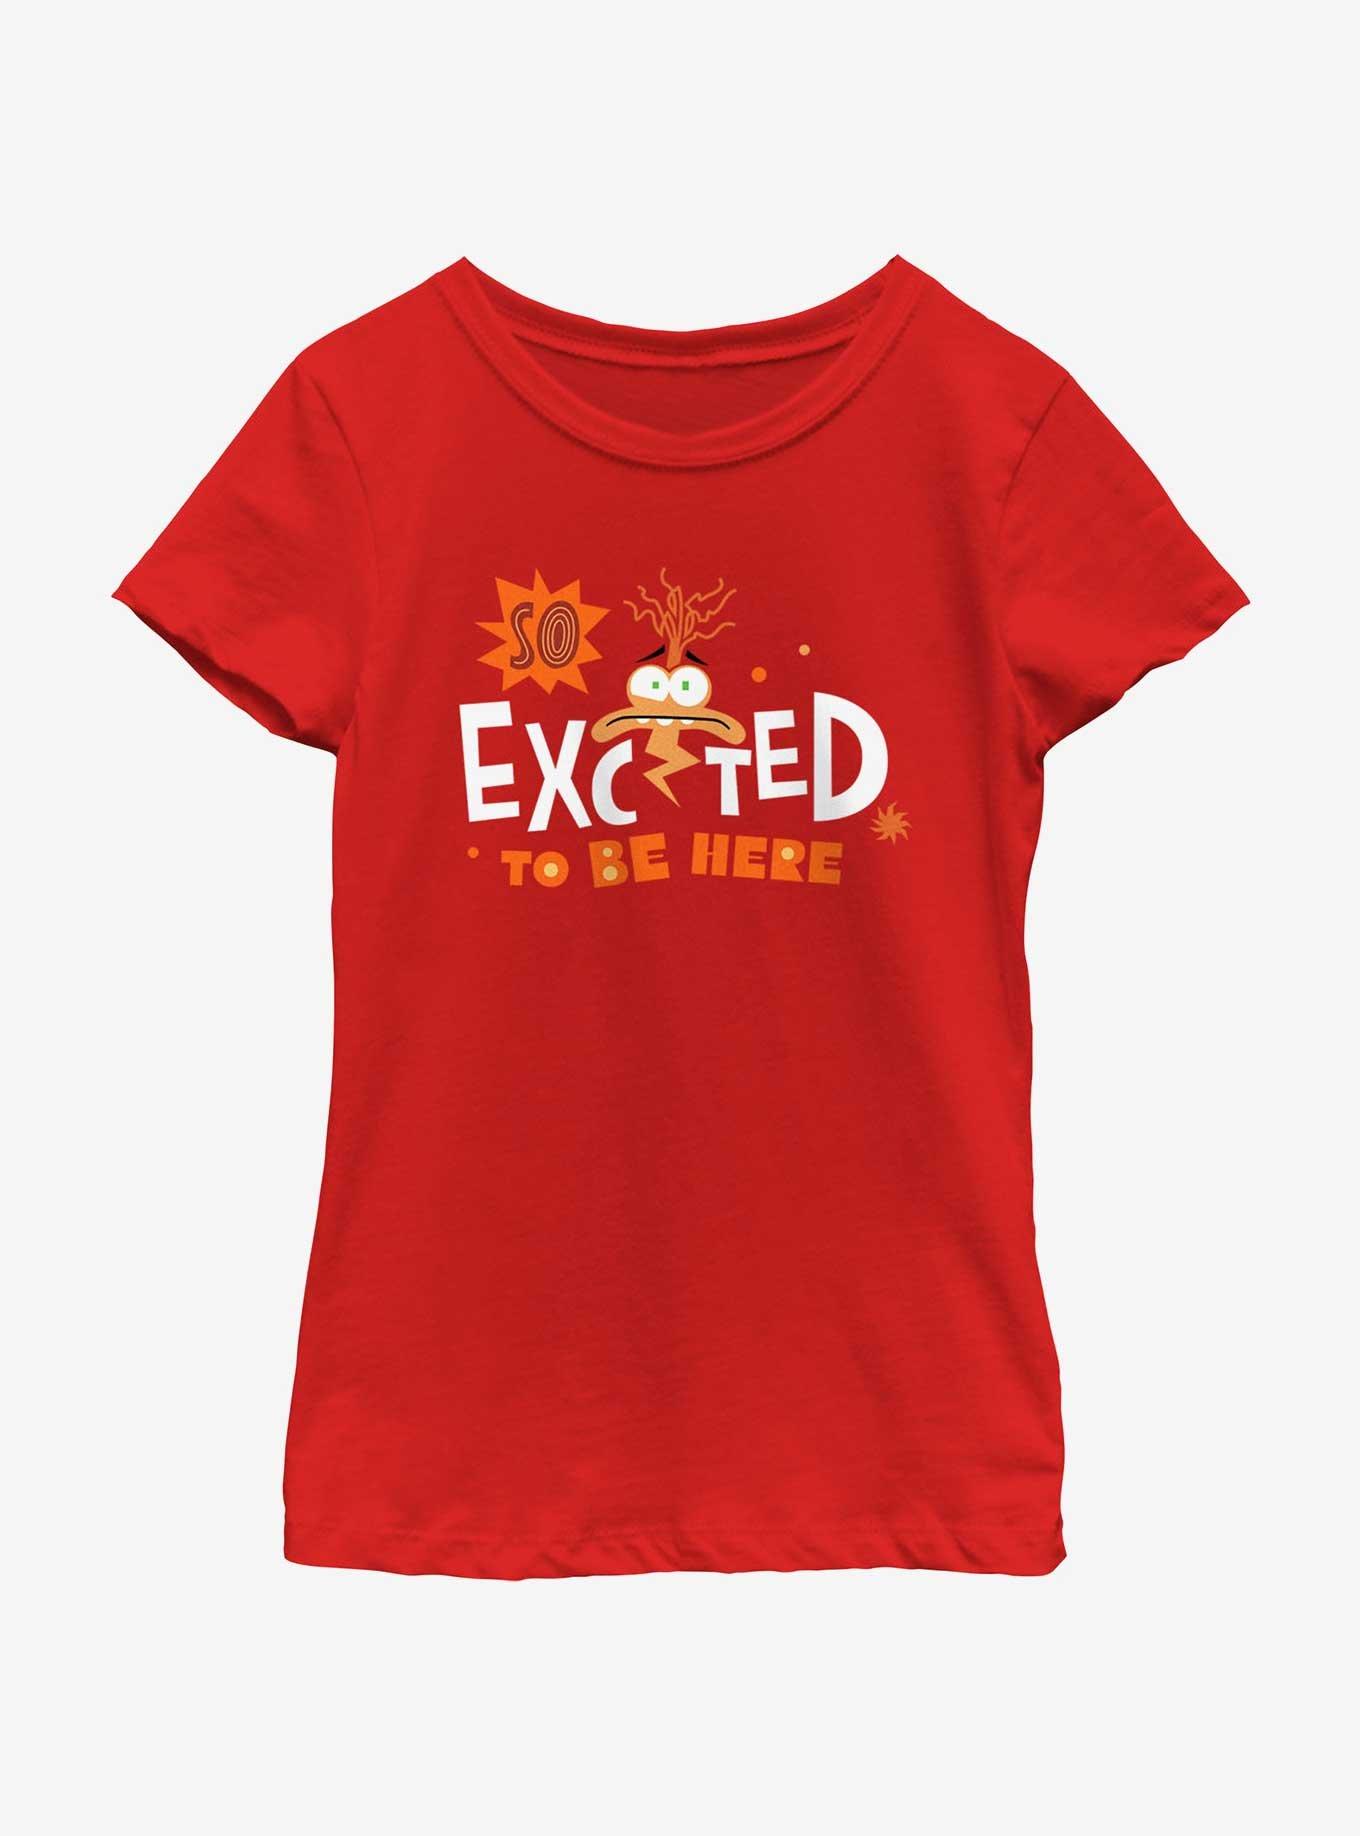 Disney Pixar Inside Out 2 Anxiety So Excited To Be Here Youth Girls T-Shirt, RED, hi-res